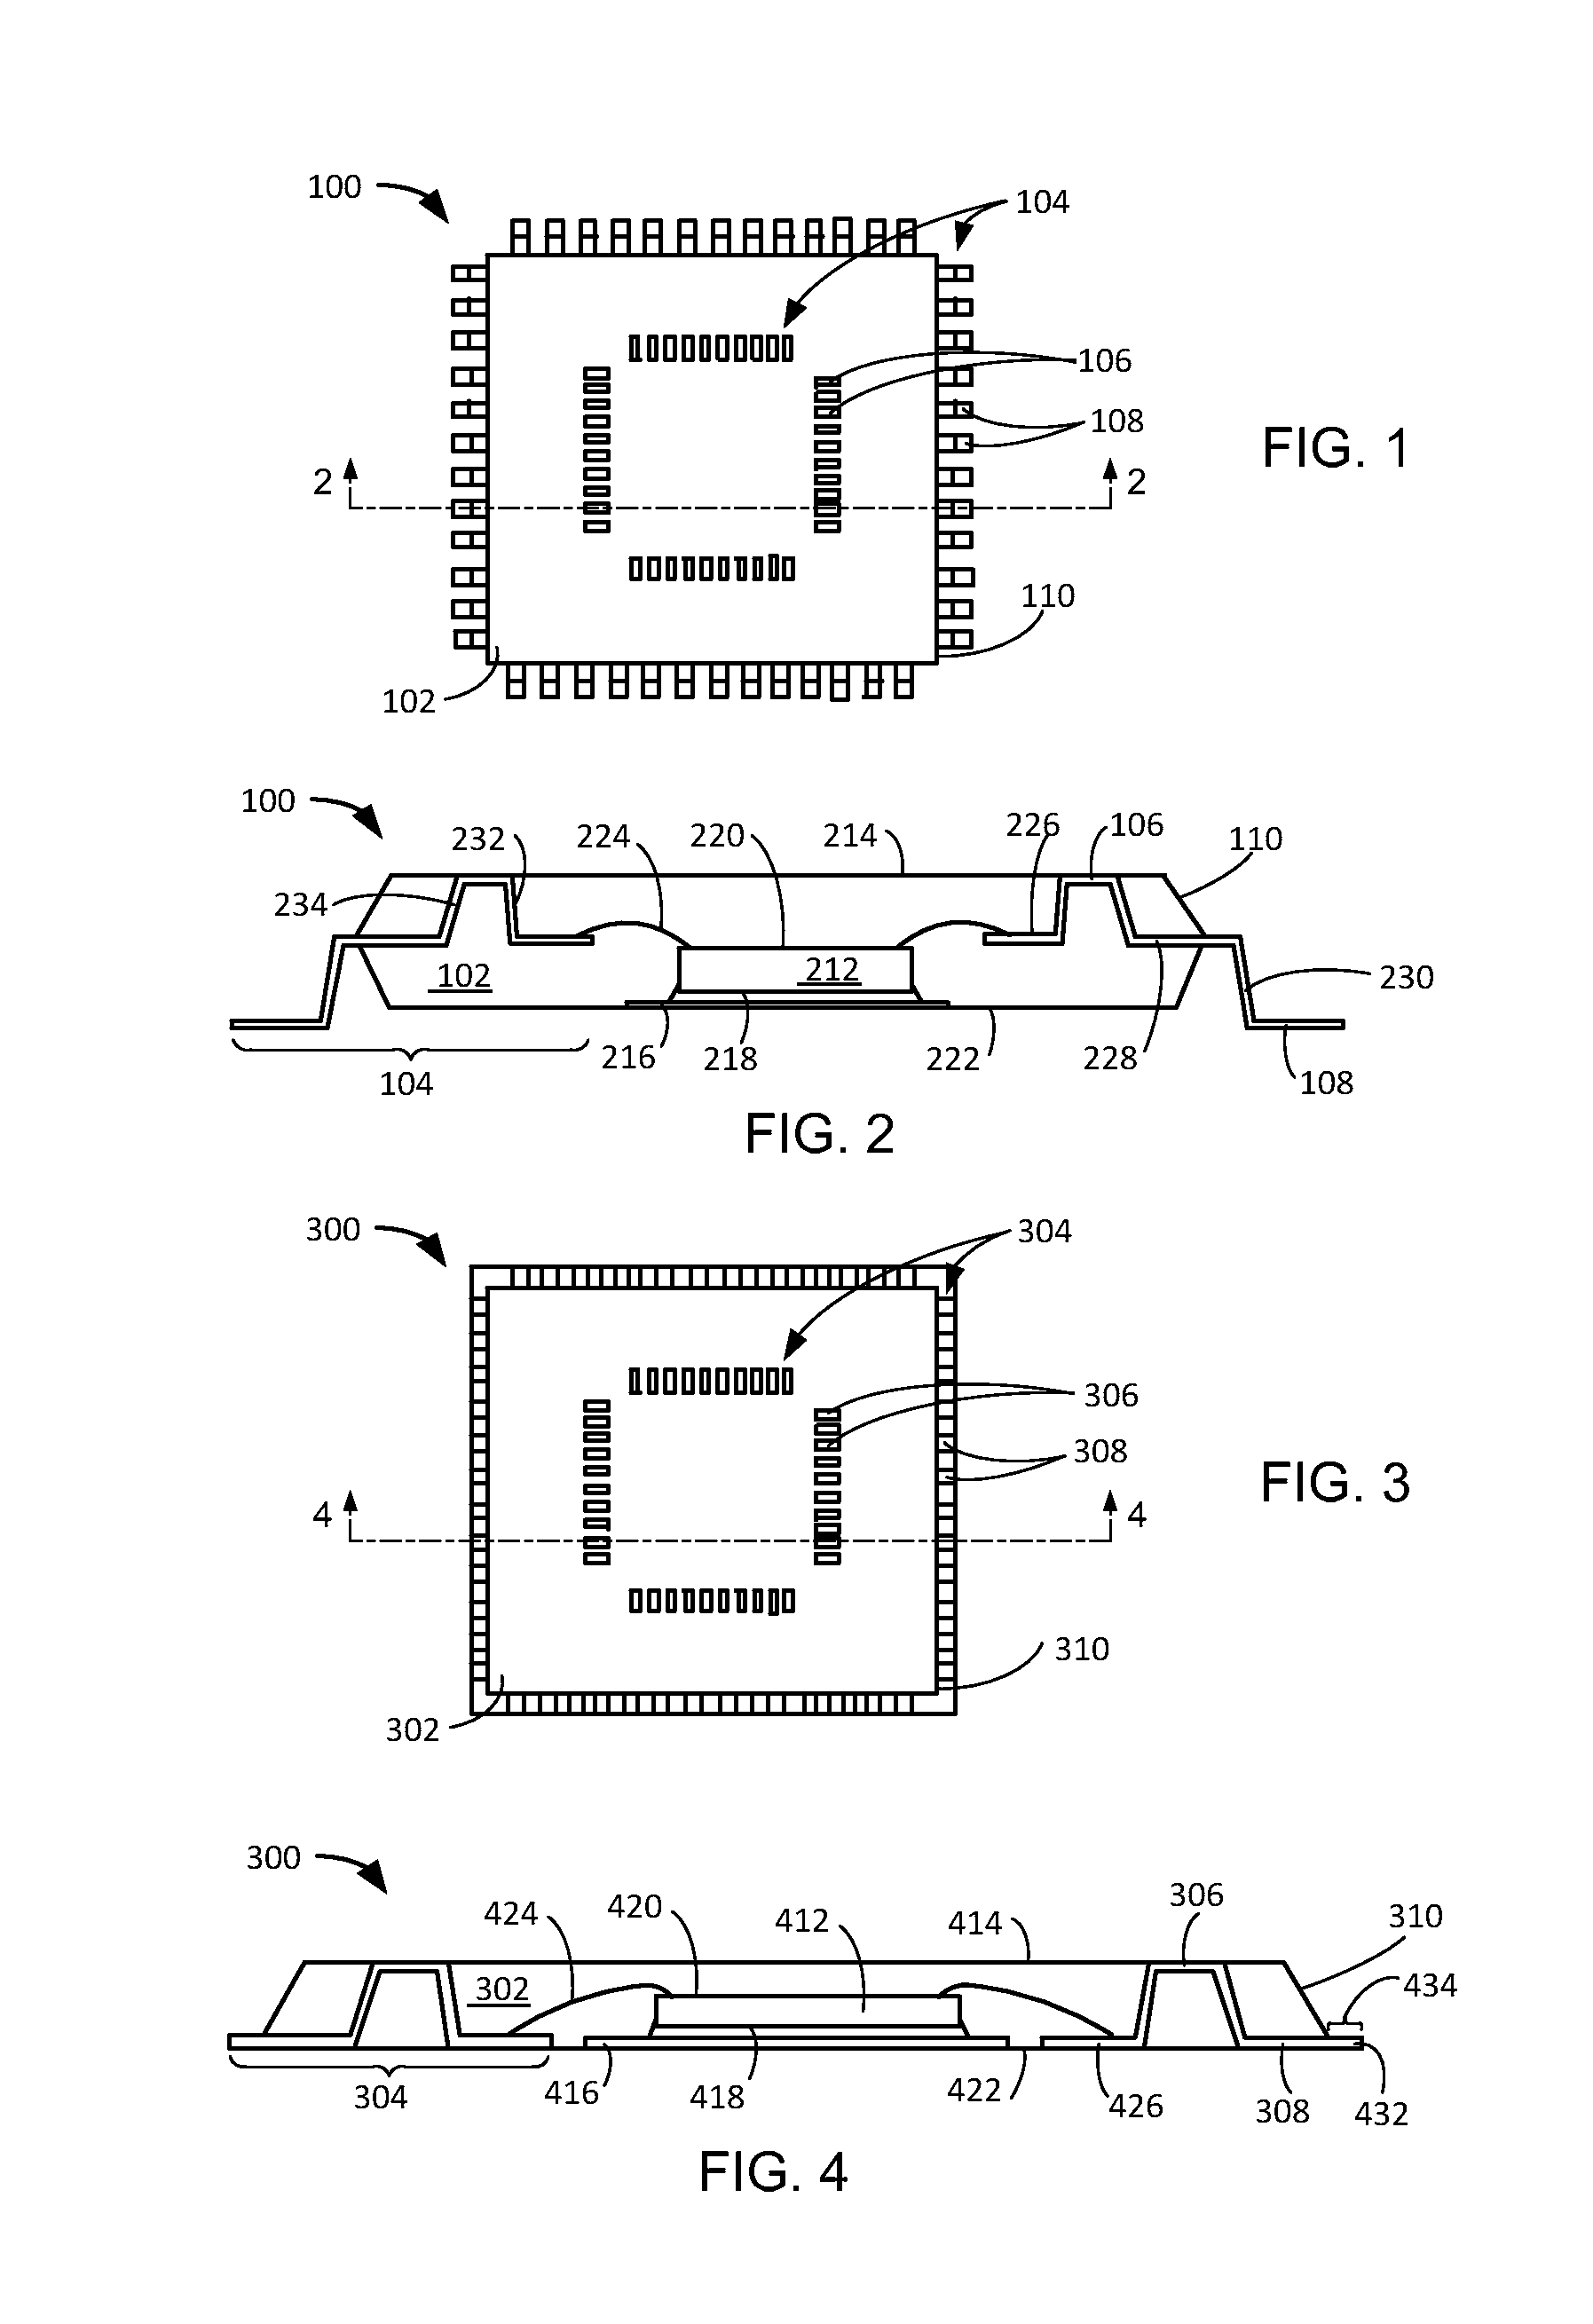 Integrated circuit package system with dual connectivity